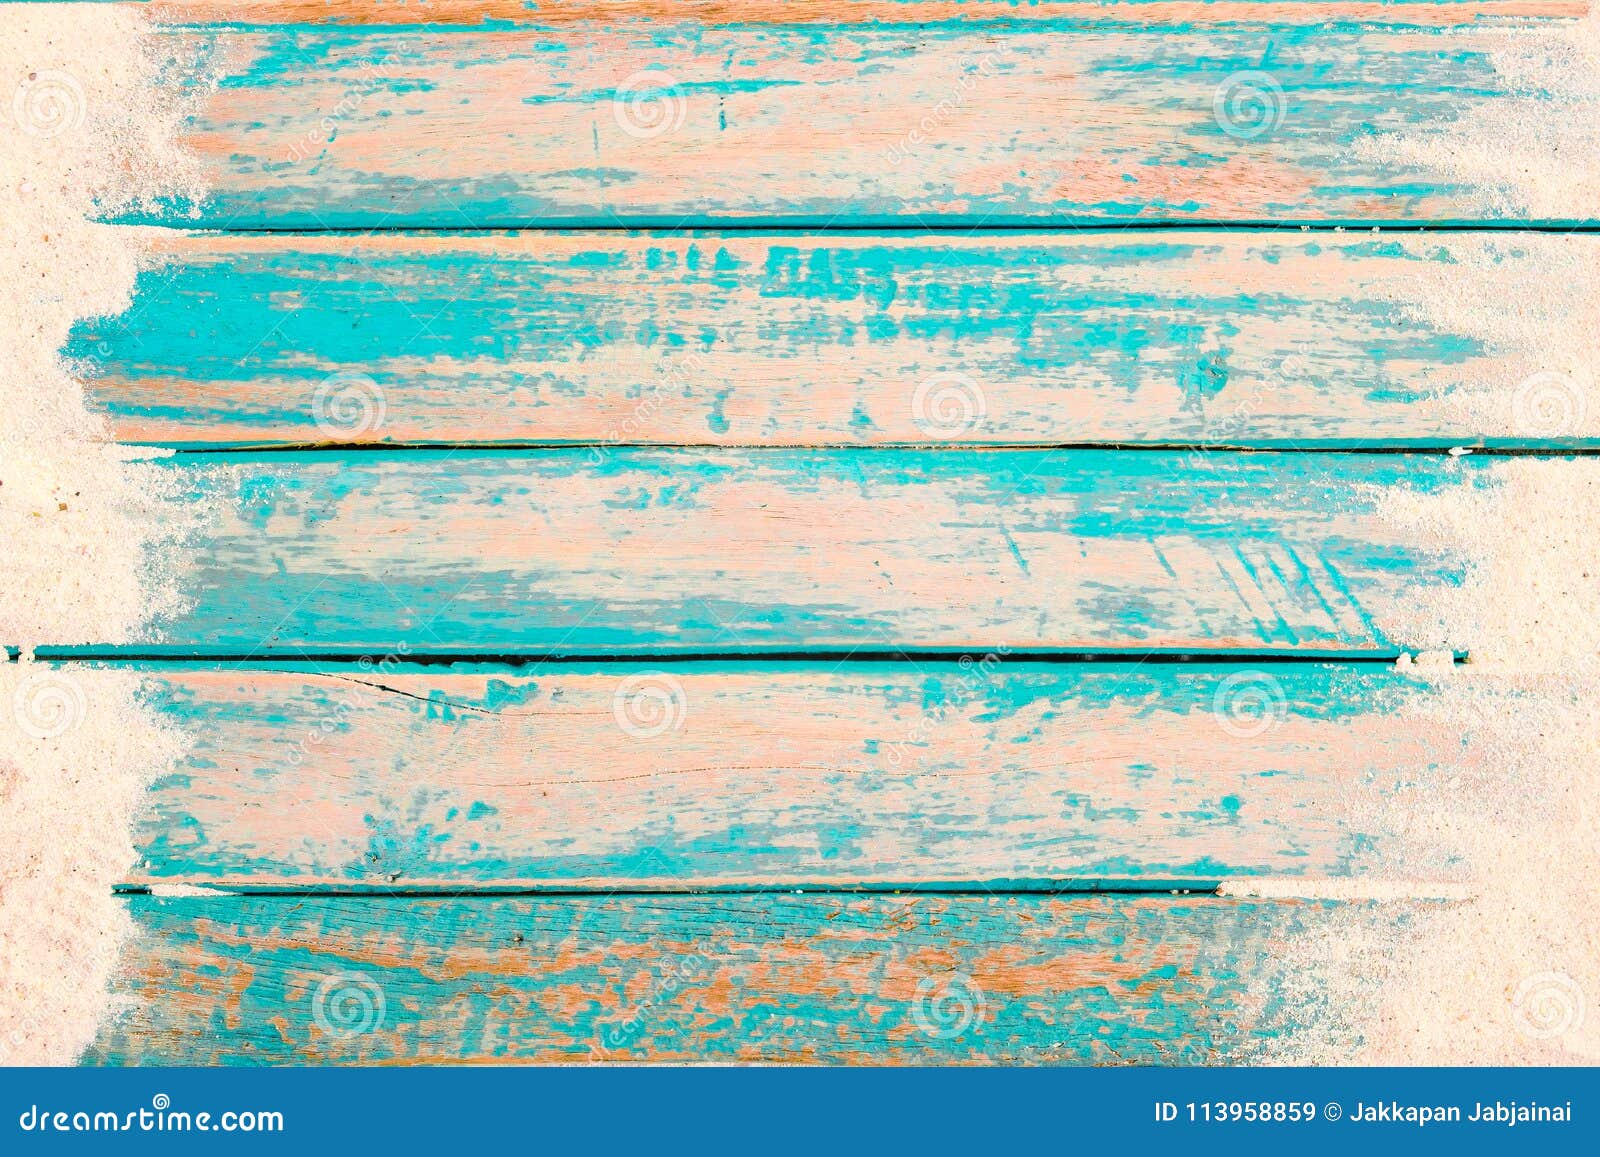 top view of beach sand on old wood plank in blue sea paint background.